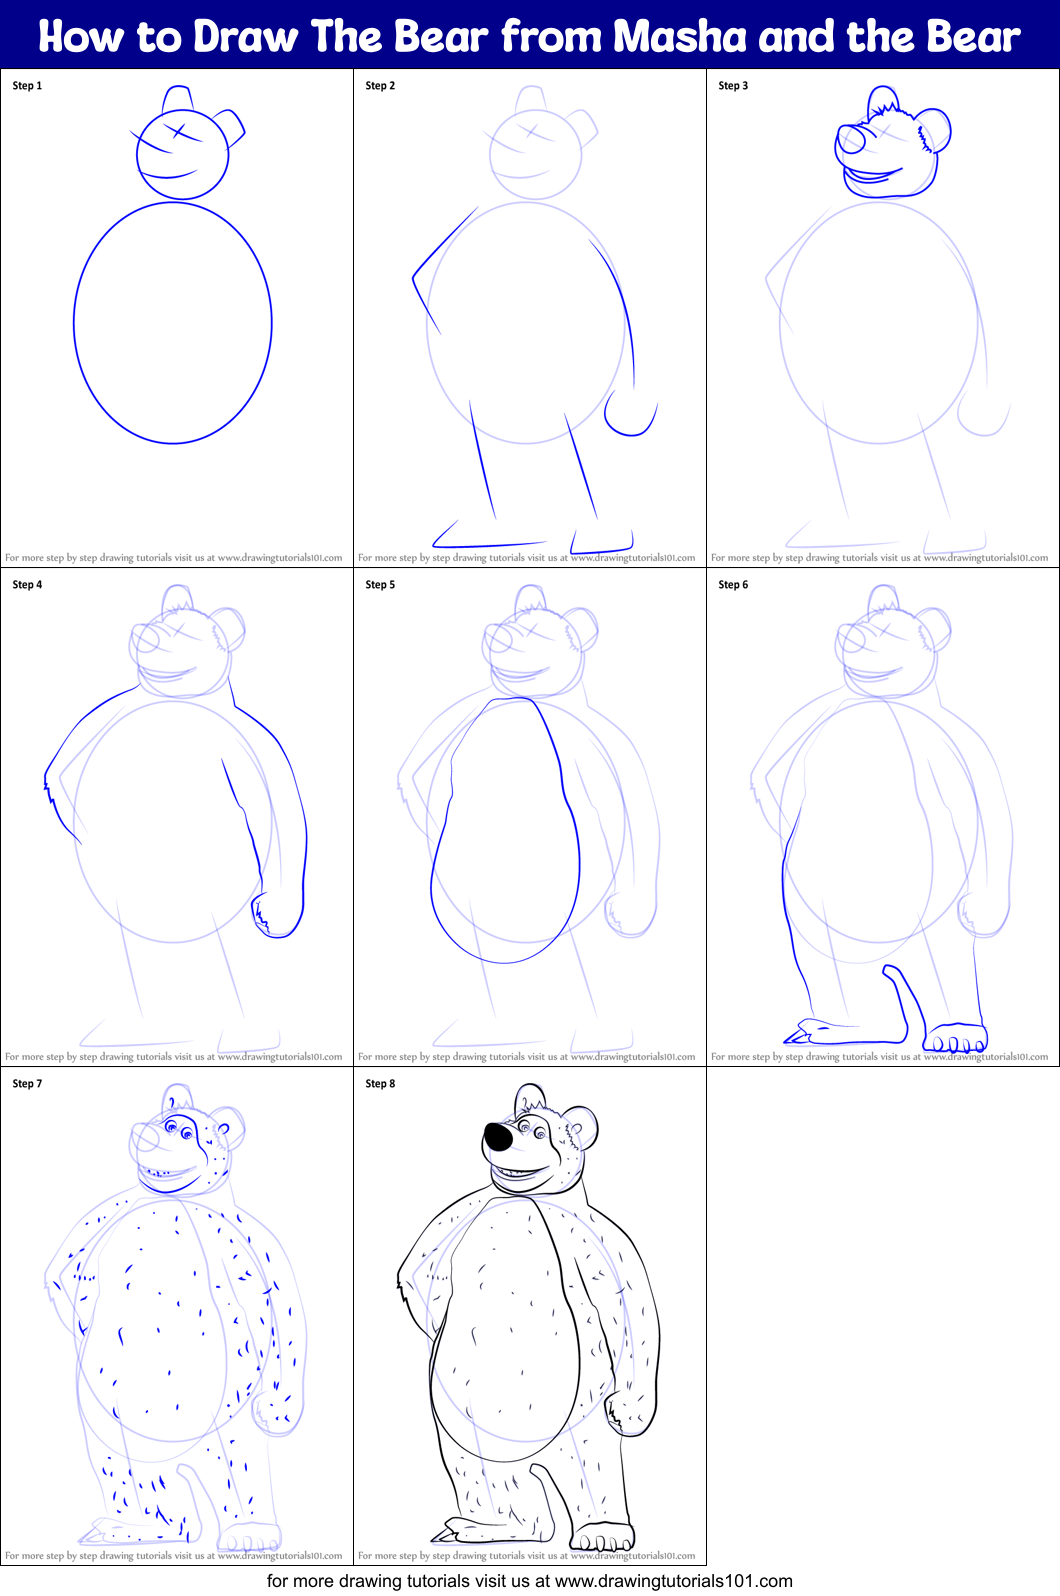 How to Draw The Bear from Masha and the Bear printable step by step